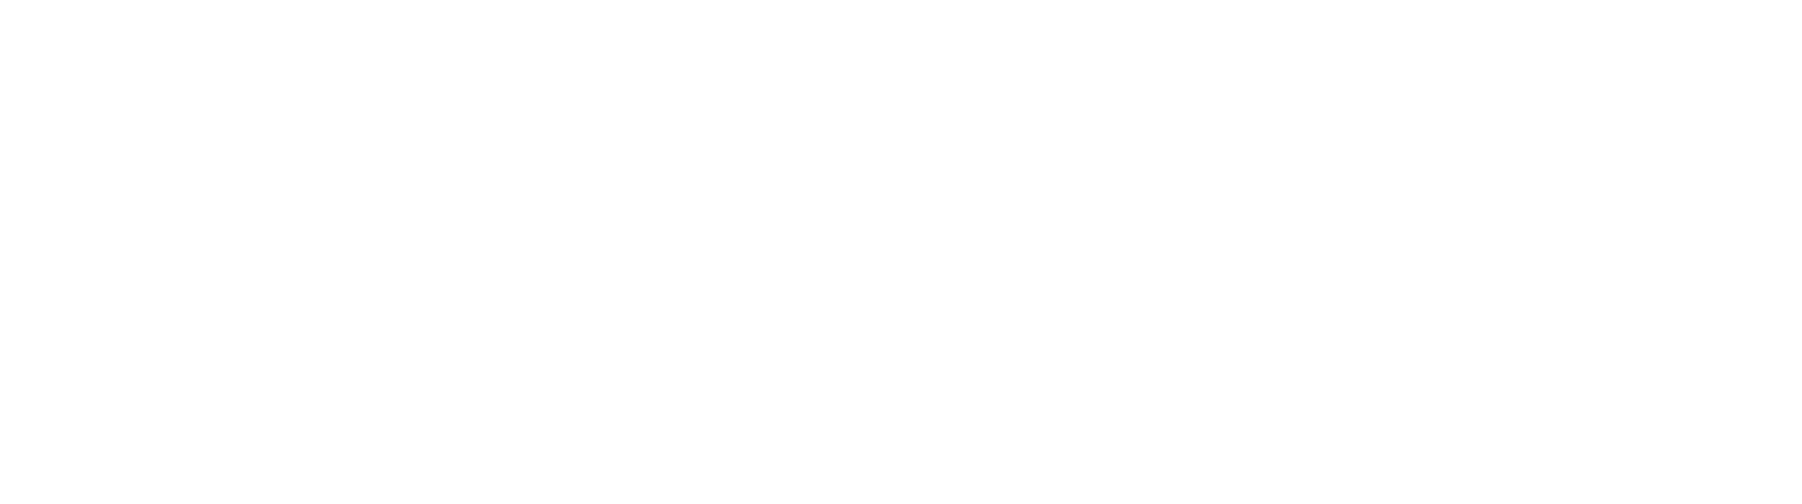 New York State of Opportunity, Council on the Arts